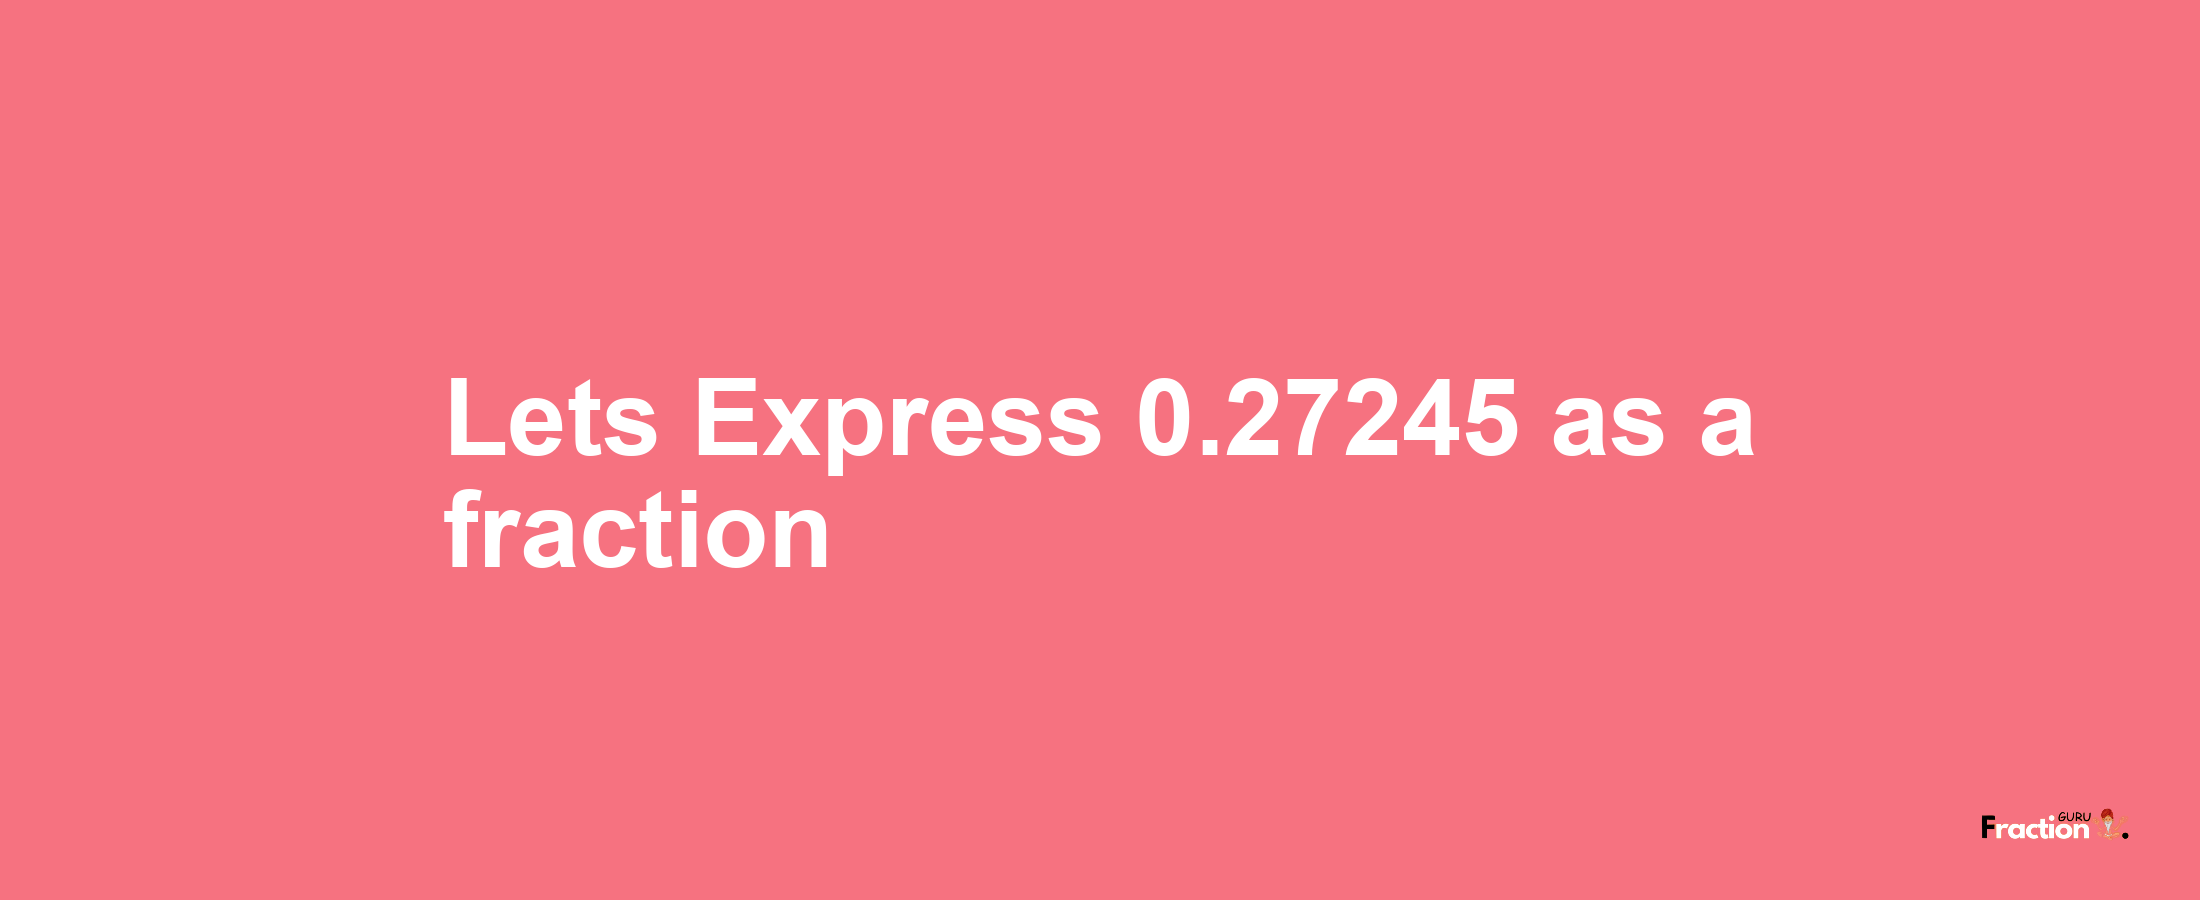 Lets Express 0.27245 as afraction